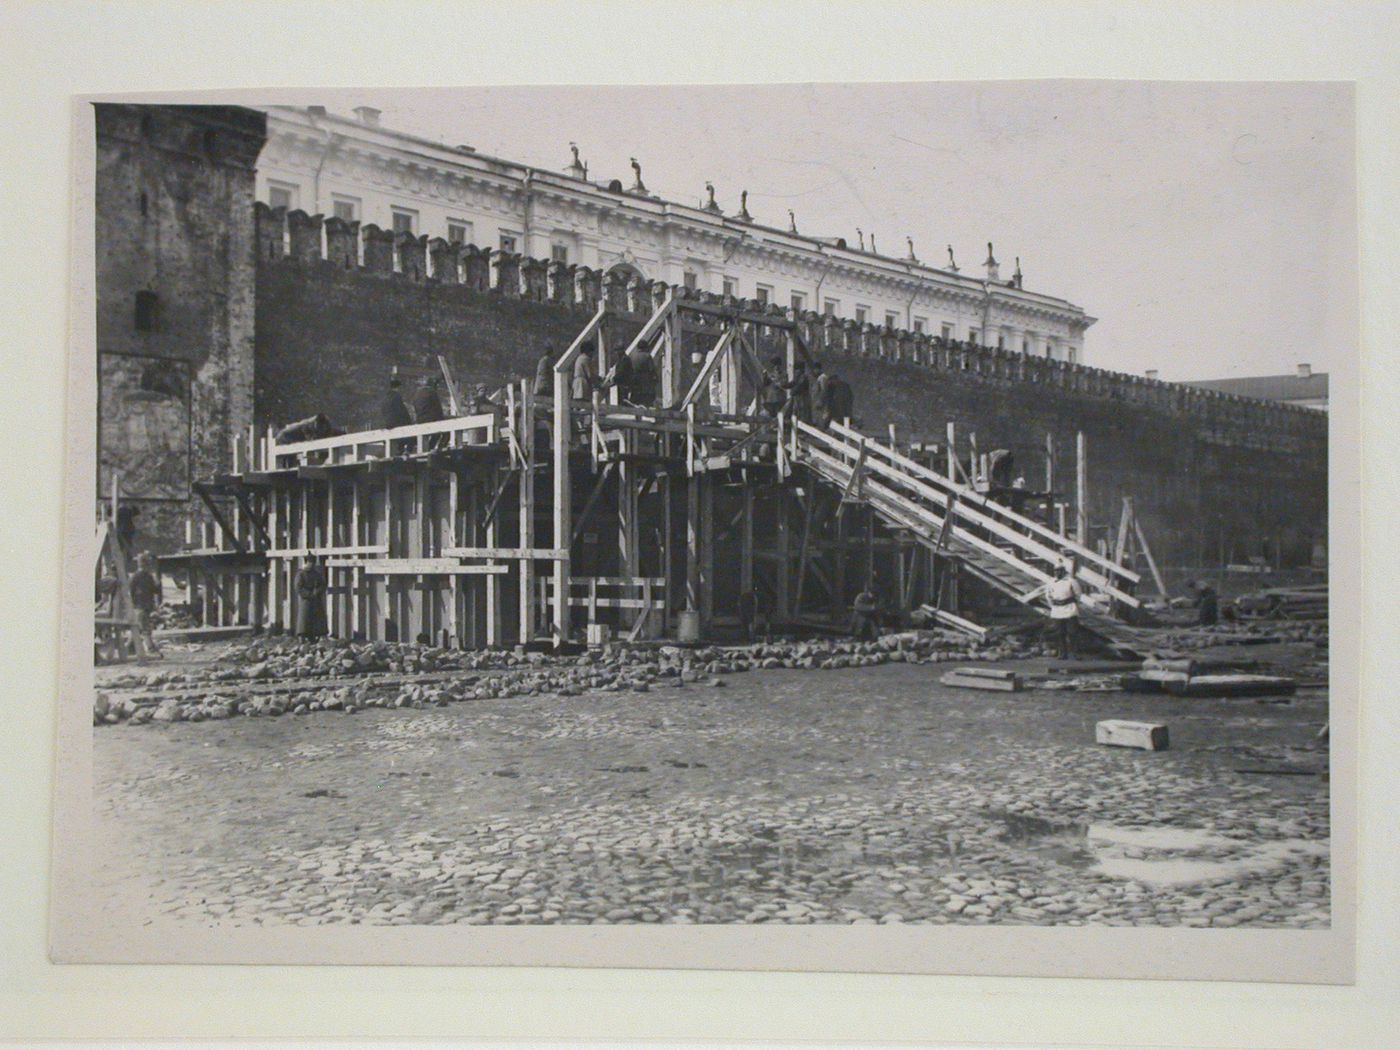 View of the second wooden Lenin Mausoleum under construction, Red Square, Moscow